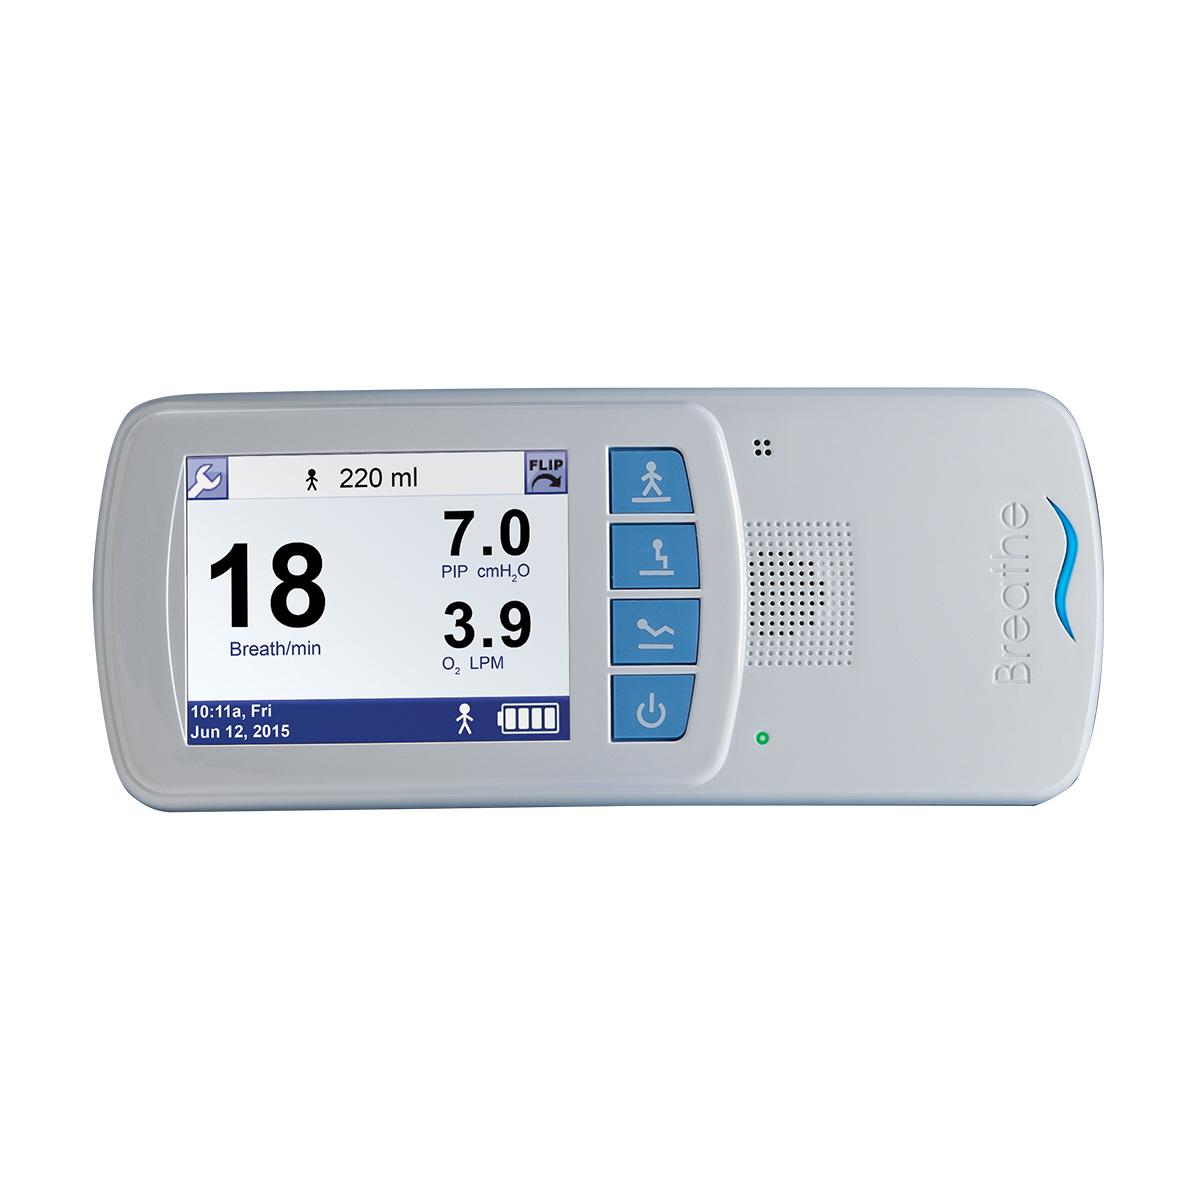 Hillrom's Life2000 Ventilator shows oxygen flow rate, peak inspiratory pressure, and breath rate.